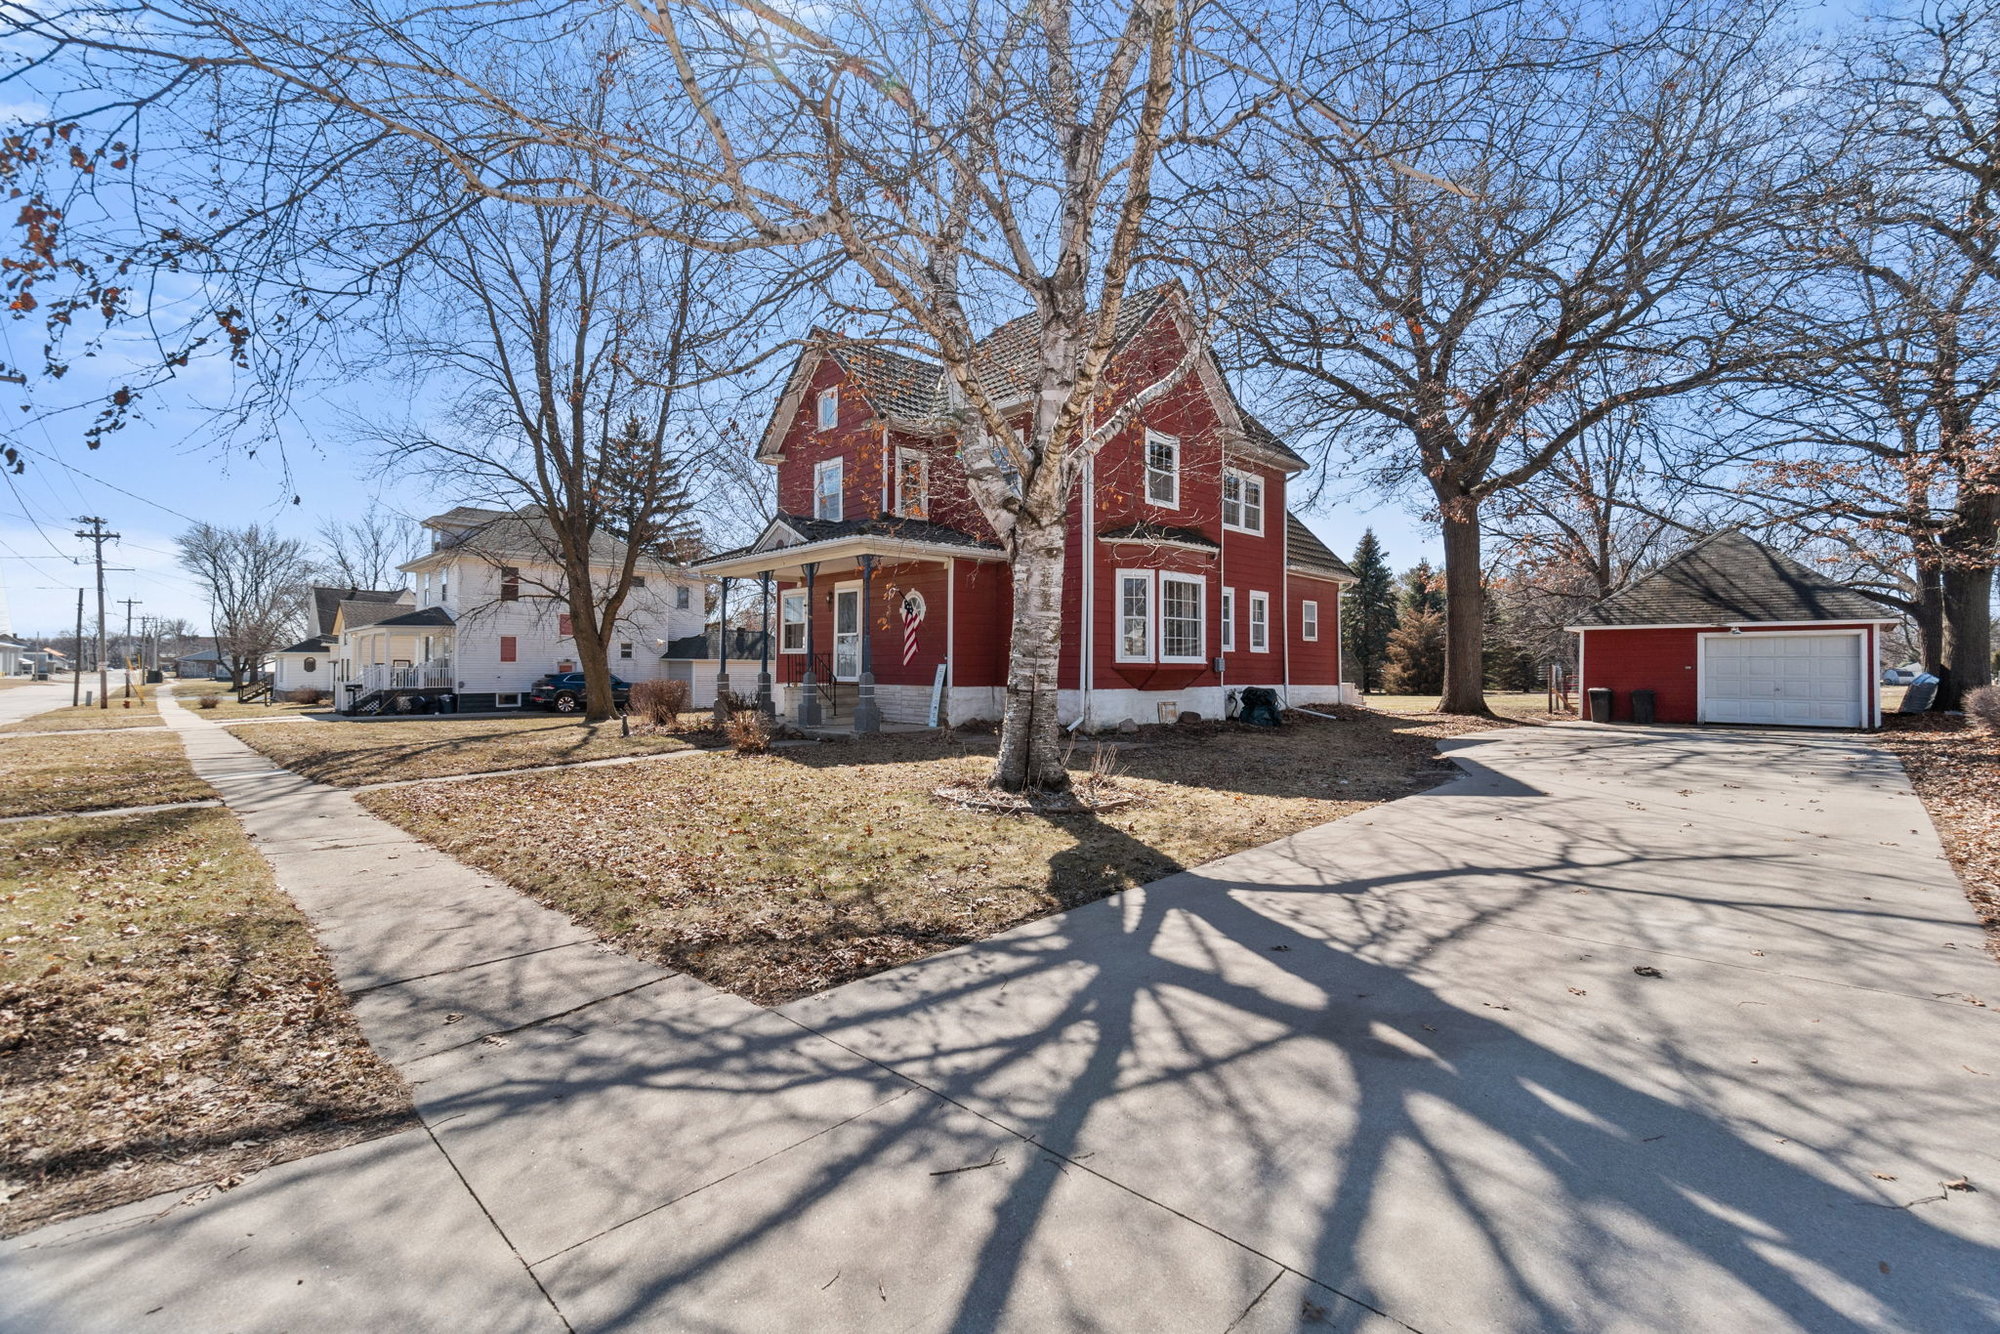 Take a Look at this Beautiful Two-Story Home in Sumner Iowa - 613 Pleasant St., Sumner